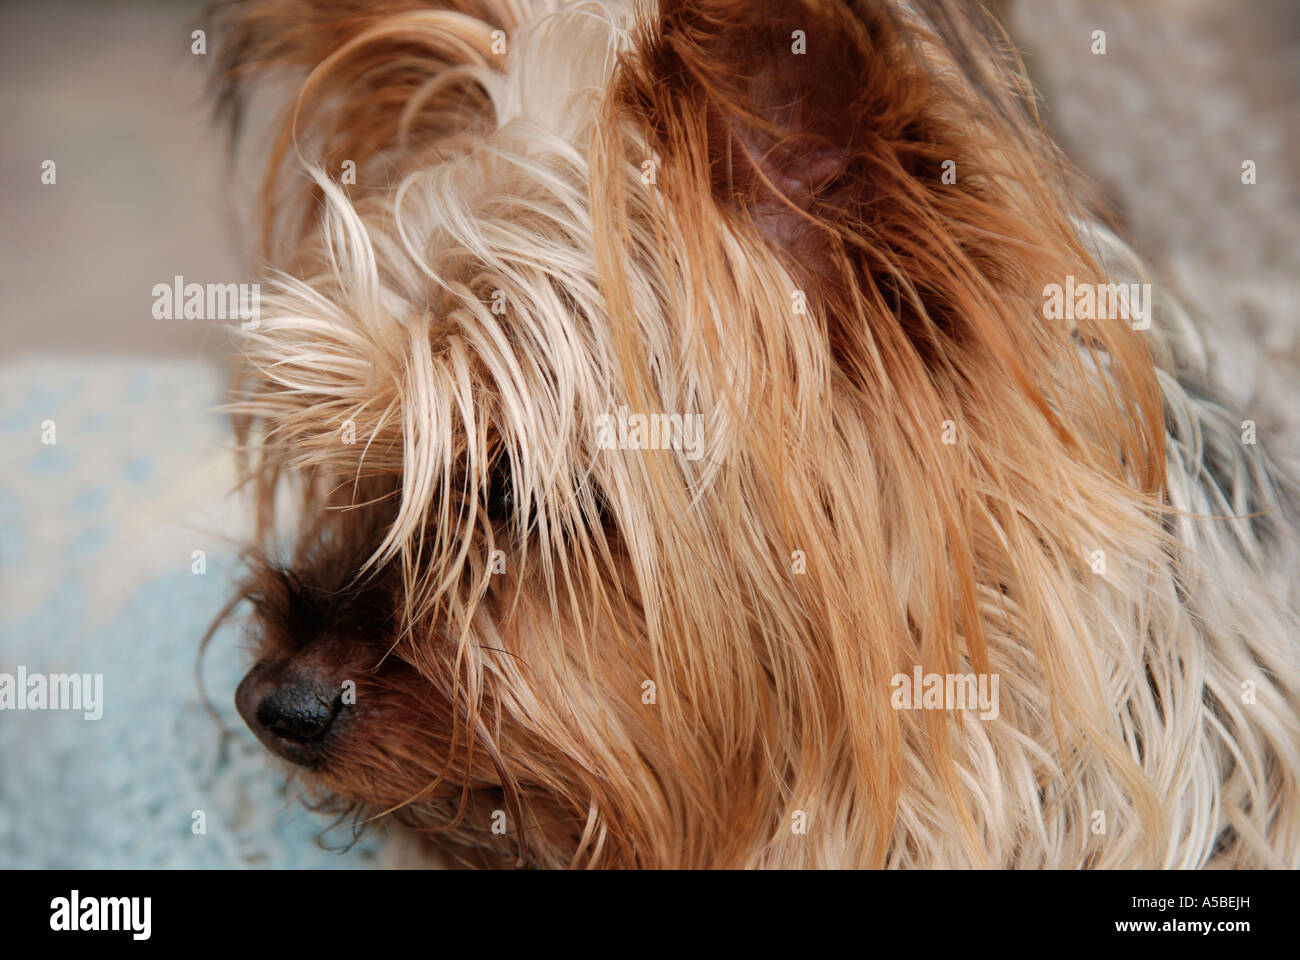 Yorkshire Terrier dog cute expression side view Stock Photo